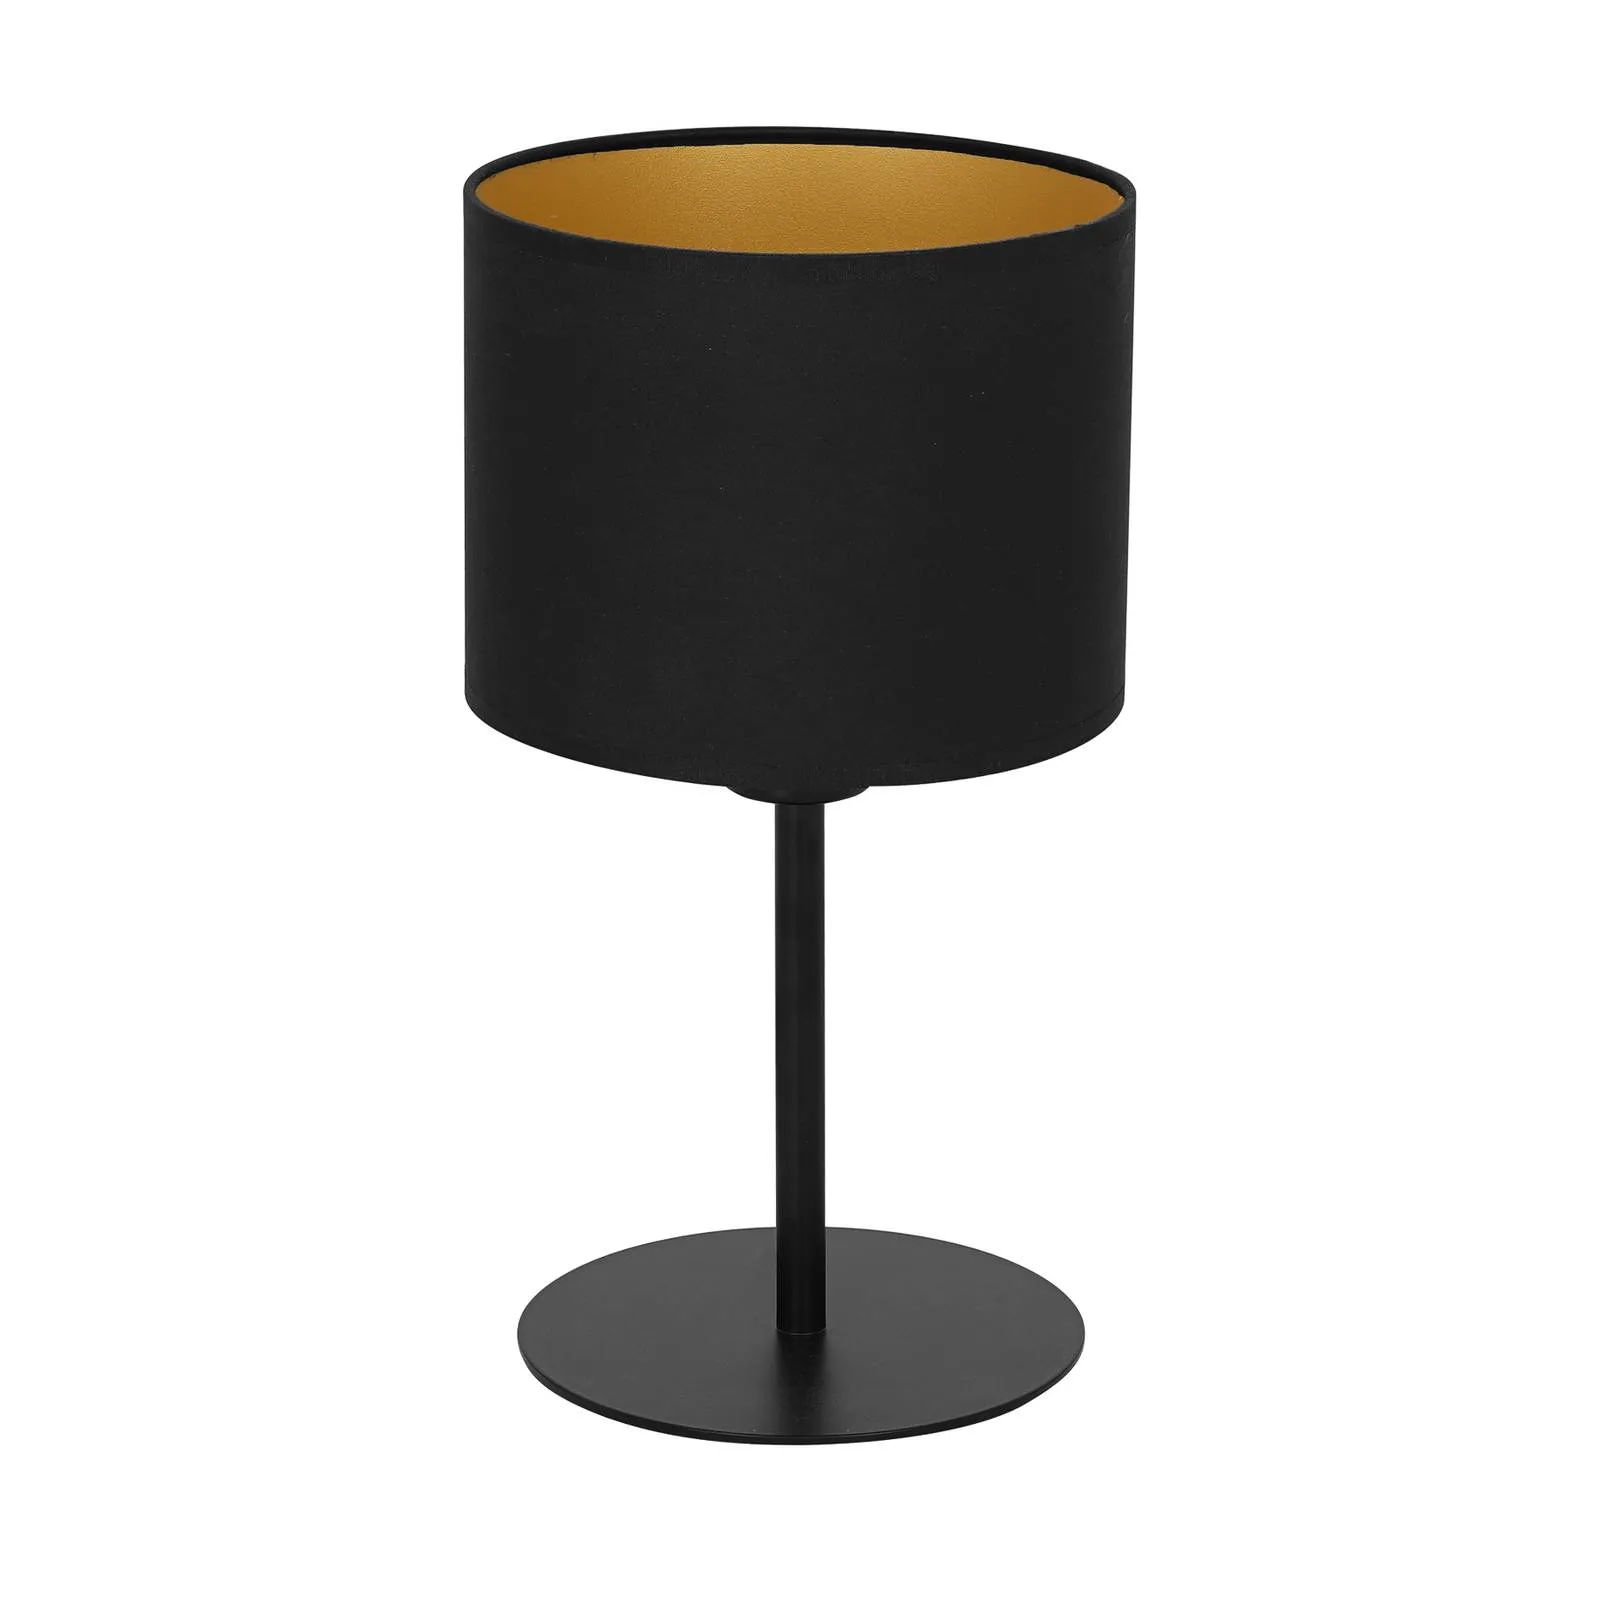 Soho table lamp with black fabric lampshade